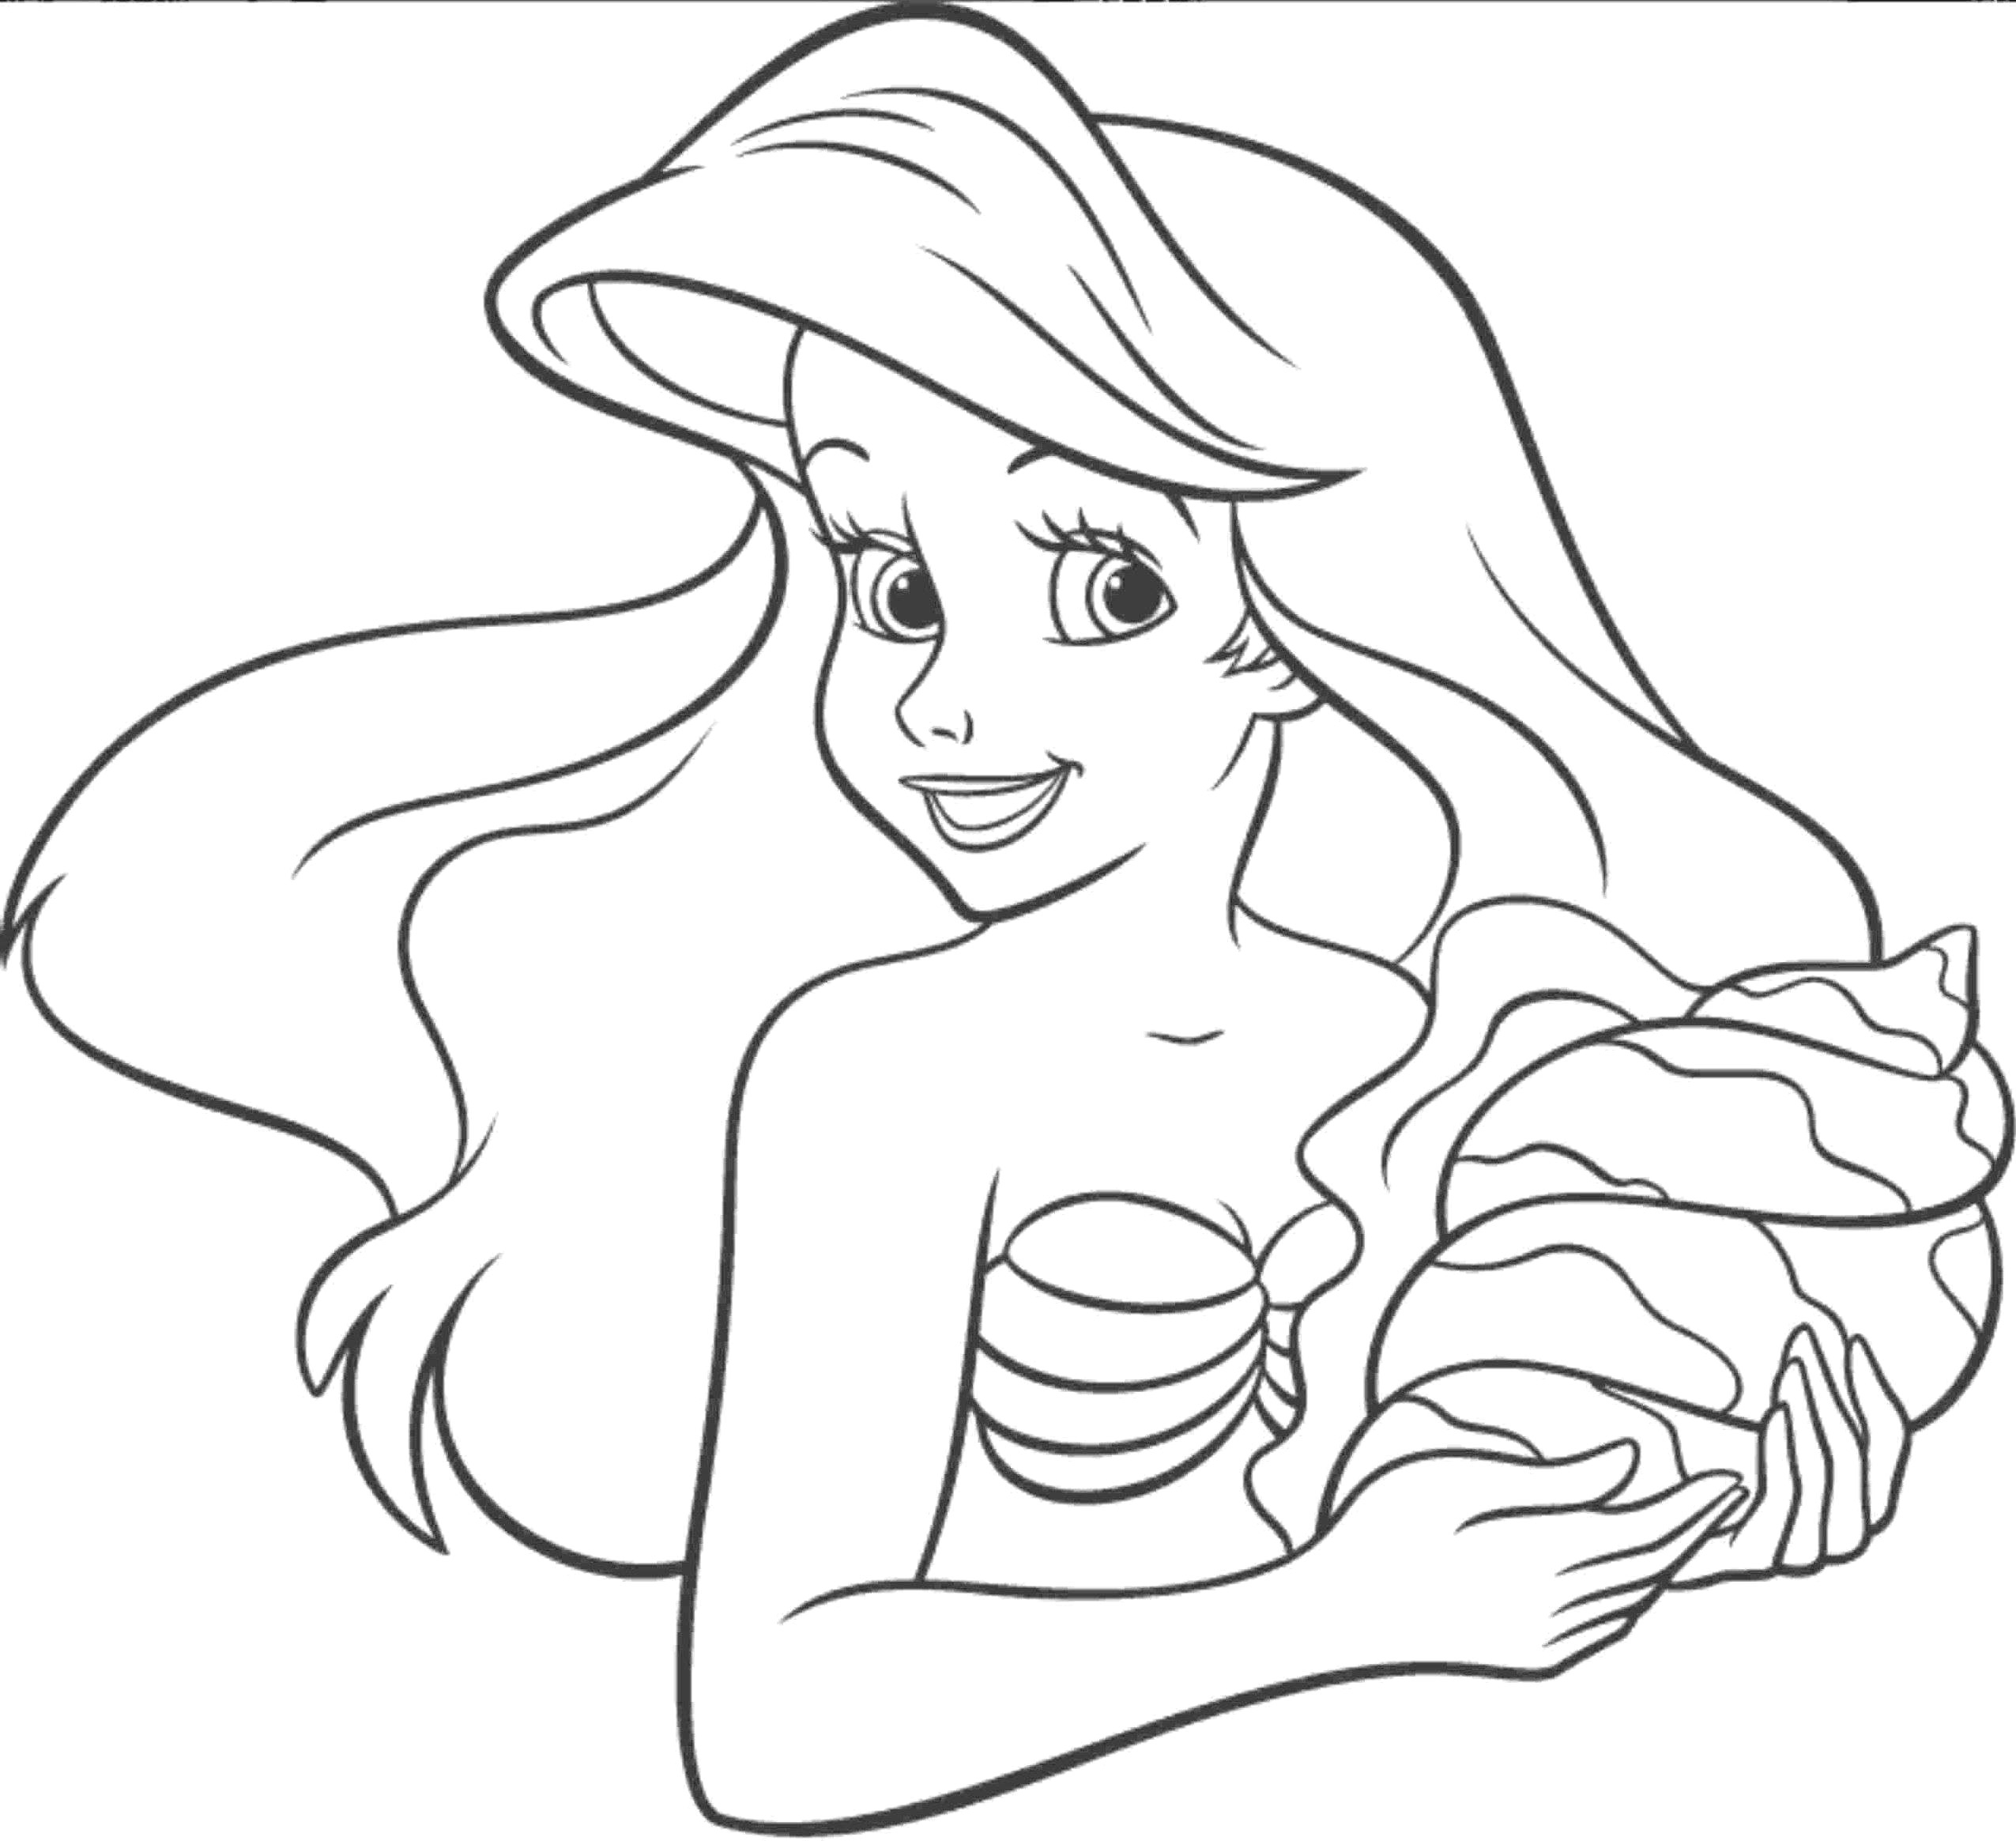 Coloring Pages Of Little Mermaid Coloring Pages The Littlemaid Coloring Page Book New Of Pictures